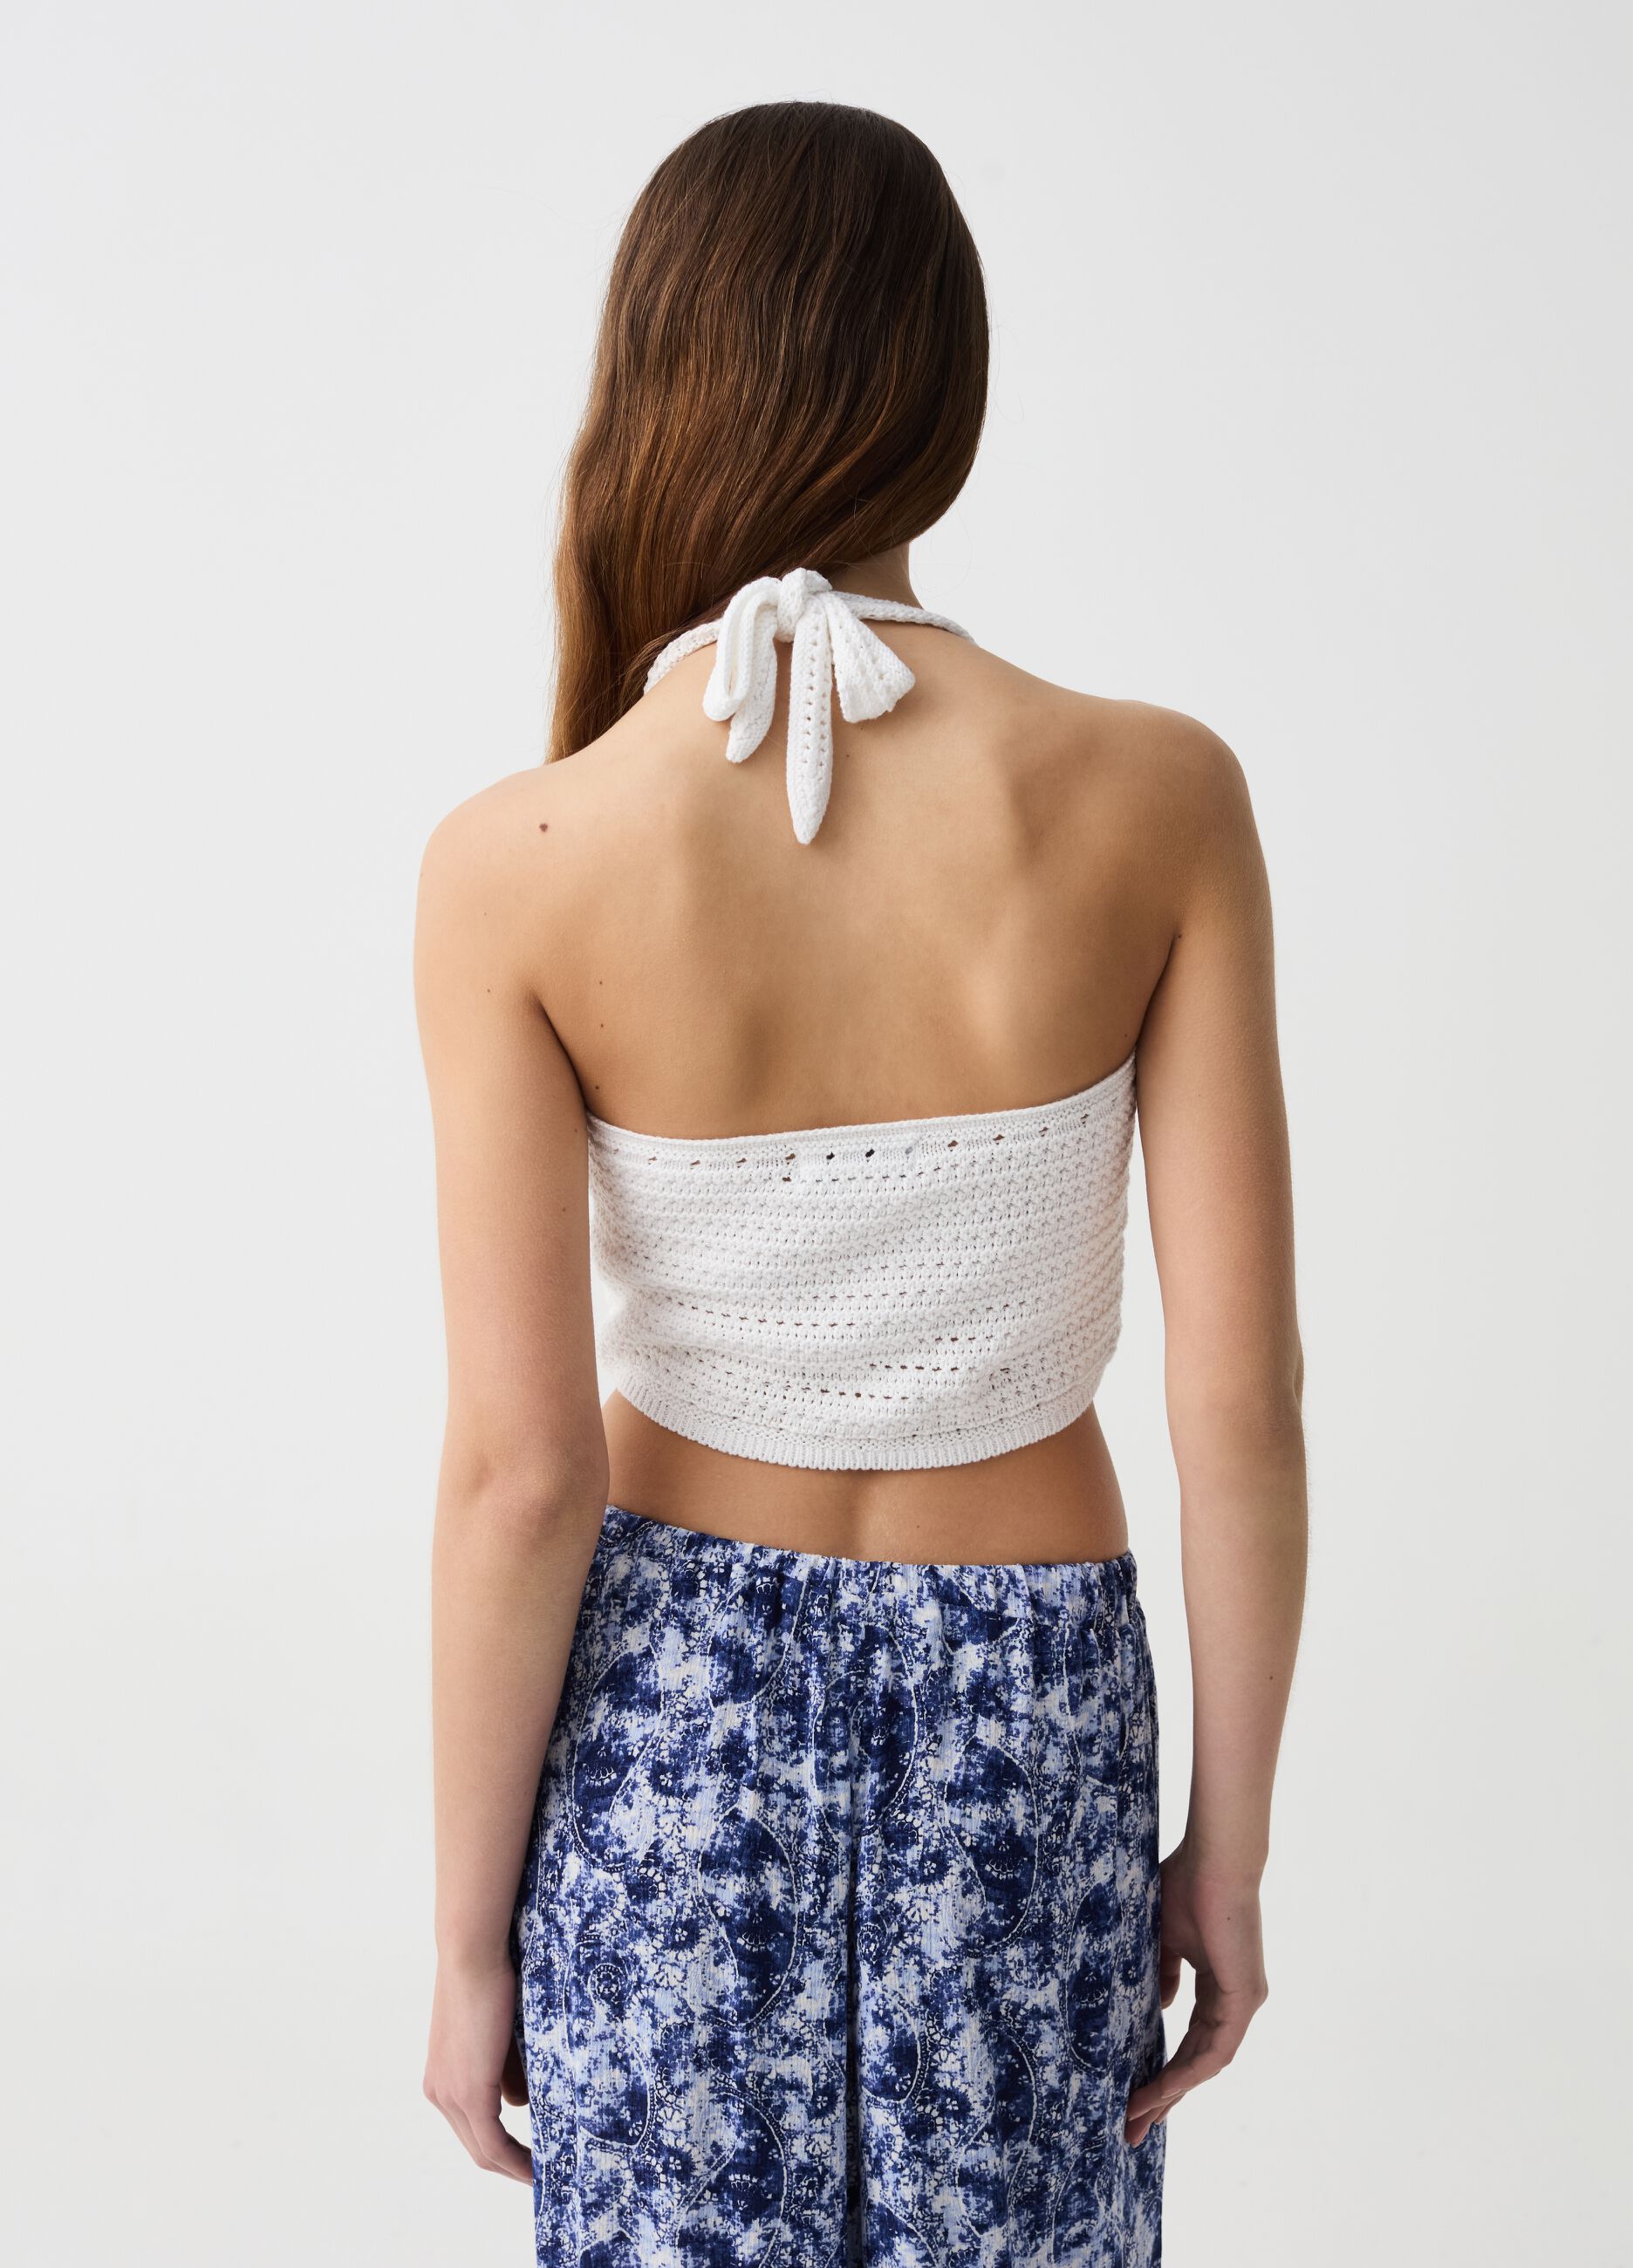 Crochet crop top with flowers embroidery